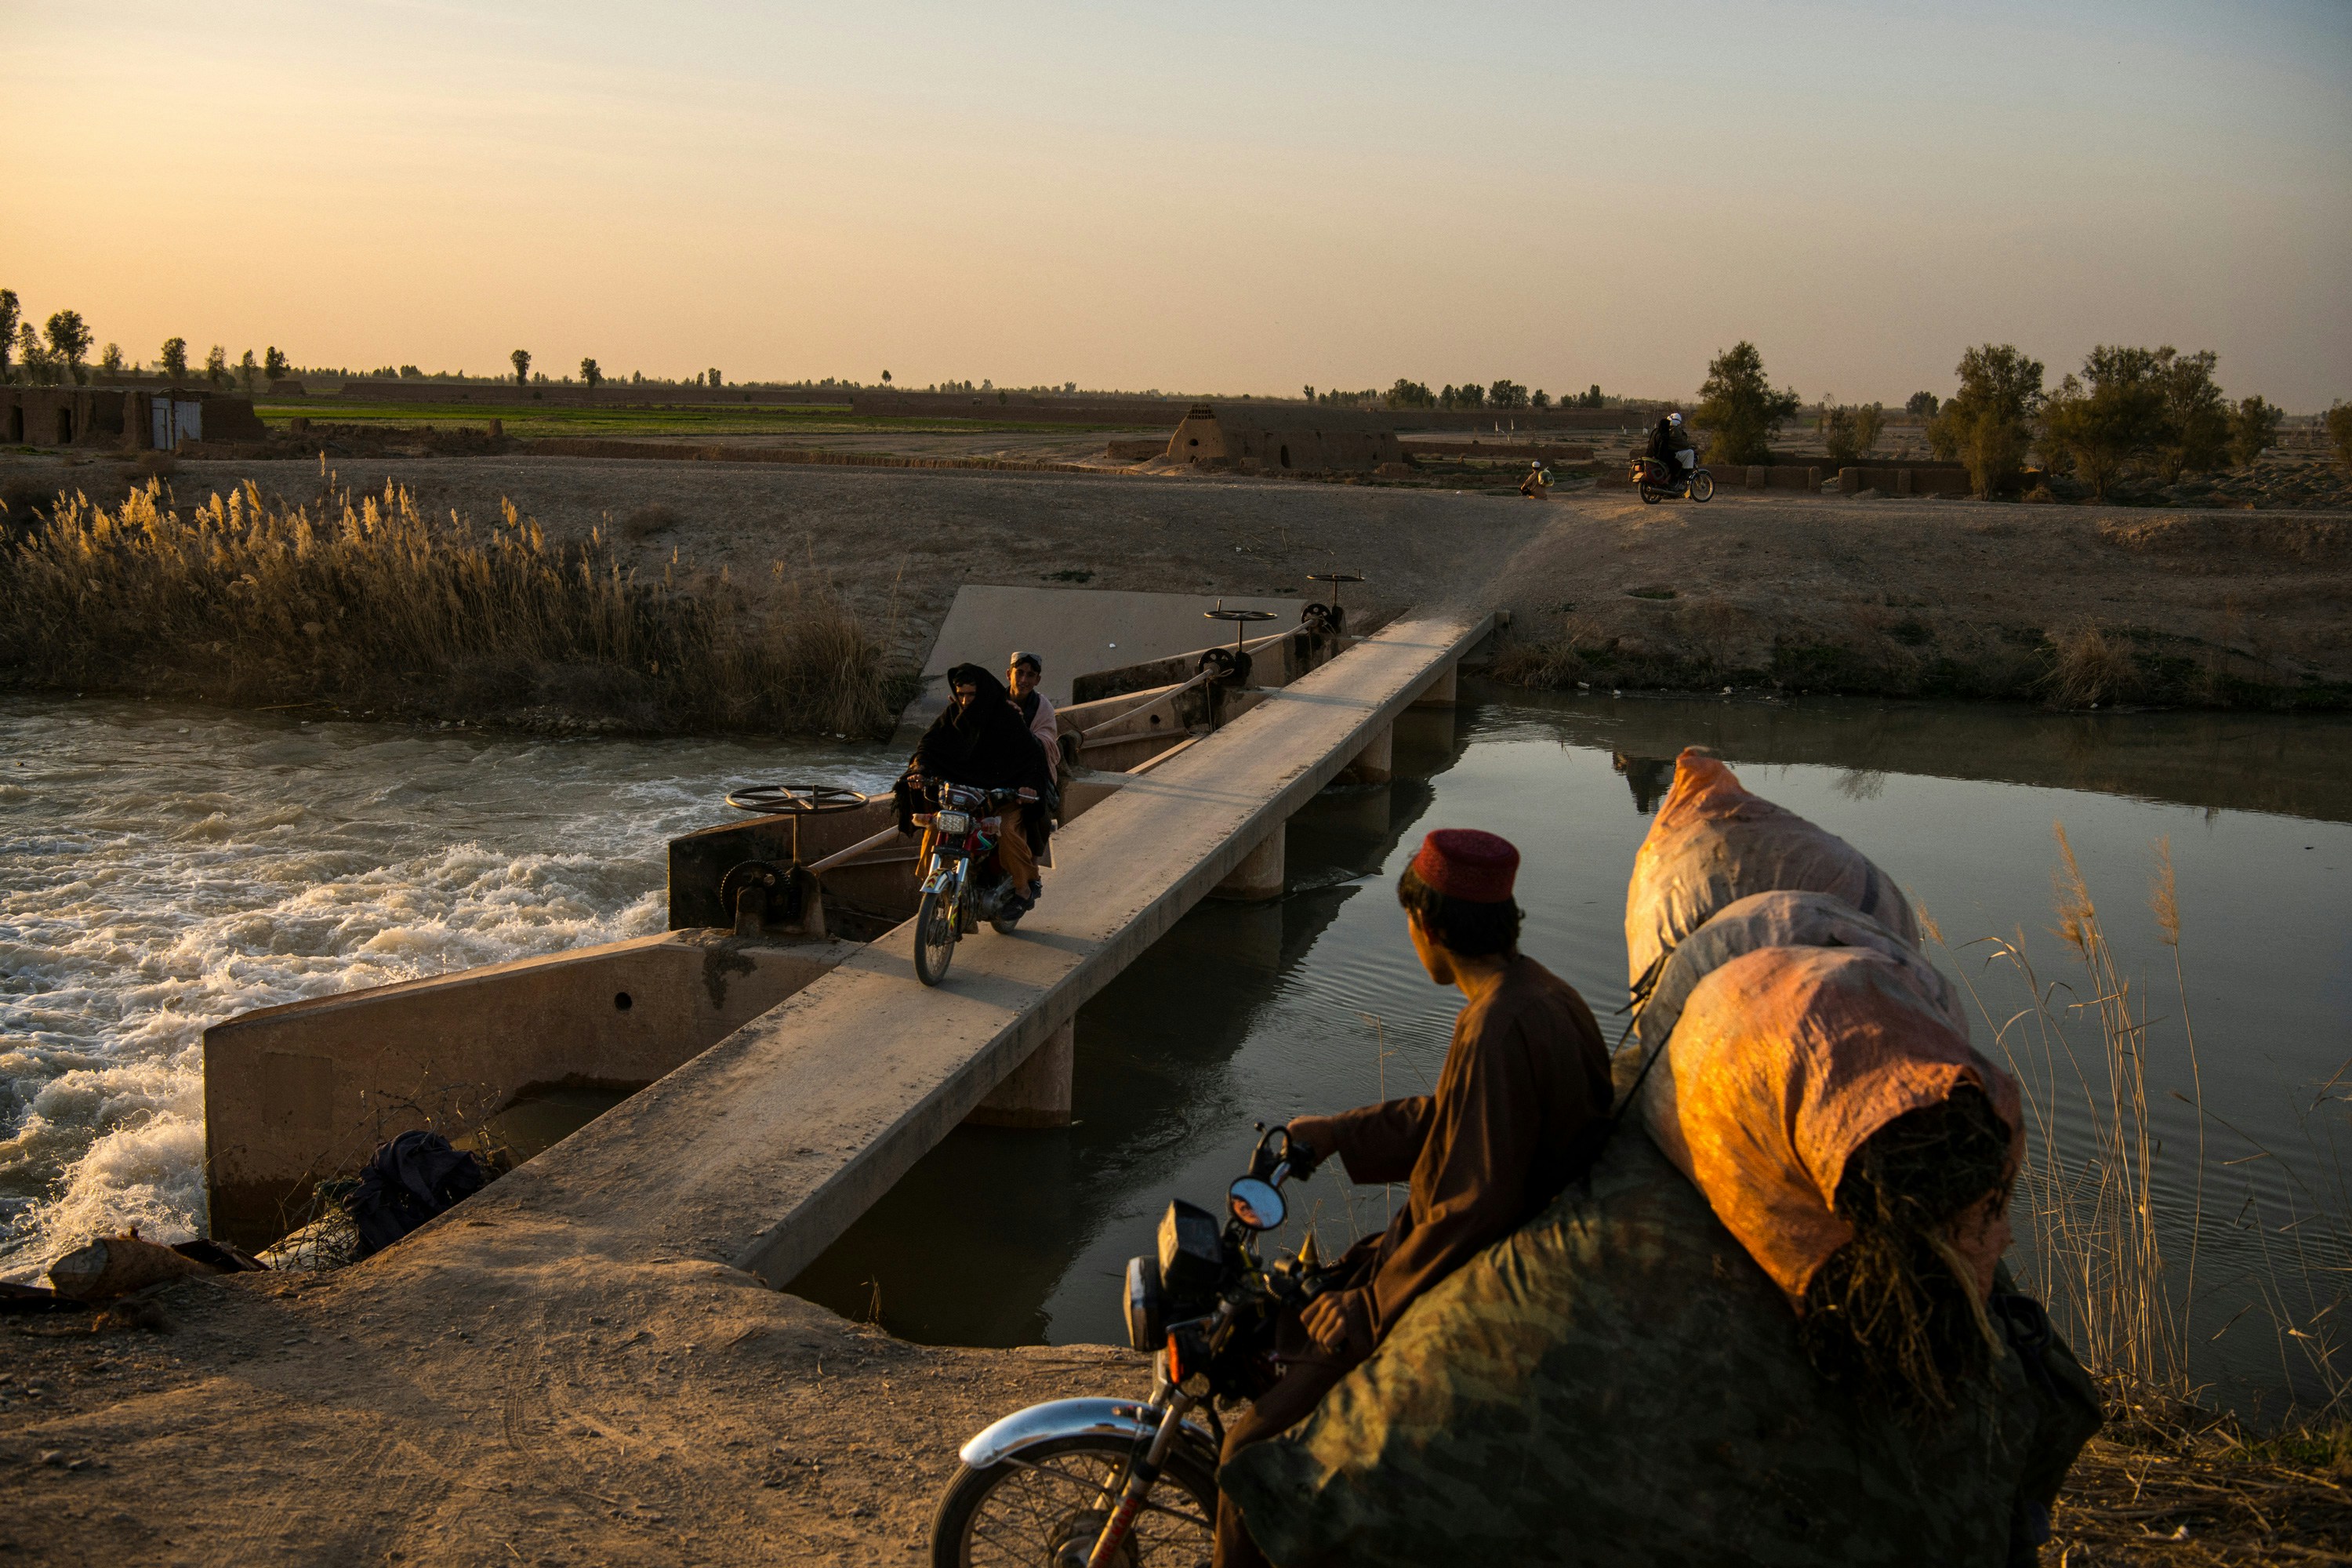 Local residents cross the Boghra Canal, in Loy Manda, an area on the outskirts of Helmand's capital Lashkar Gah. Under normal circumstances, the canal marks the frontline between government and Taliban forces. This week, however, during a week-long reduction in violence agreed to by the Taliban, the Afghan government and U.S. forces, local residents came and went on a strip of road beside it and back and forth across the canal itself. Residents were relaxed and enjoying the chance to move about without the fear of being caught in crossfire between the warring parties. The road is usually all but abandoned.